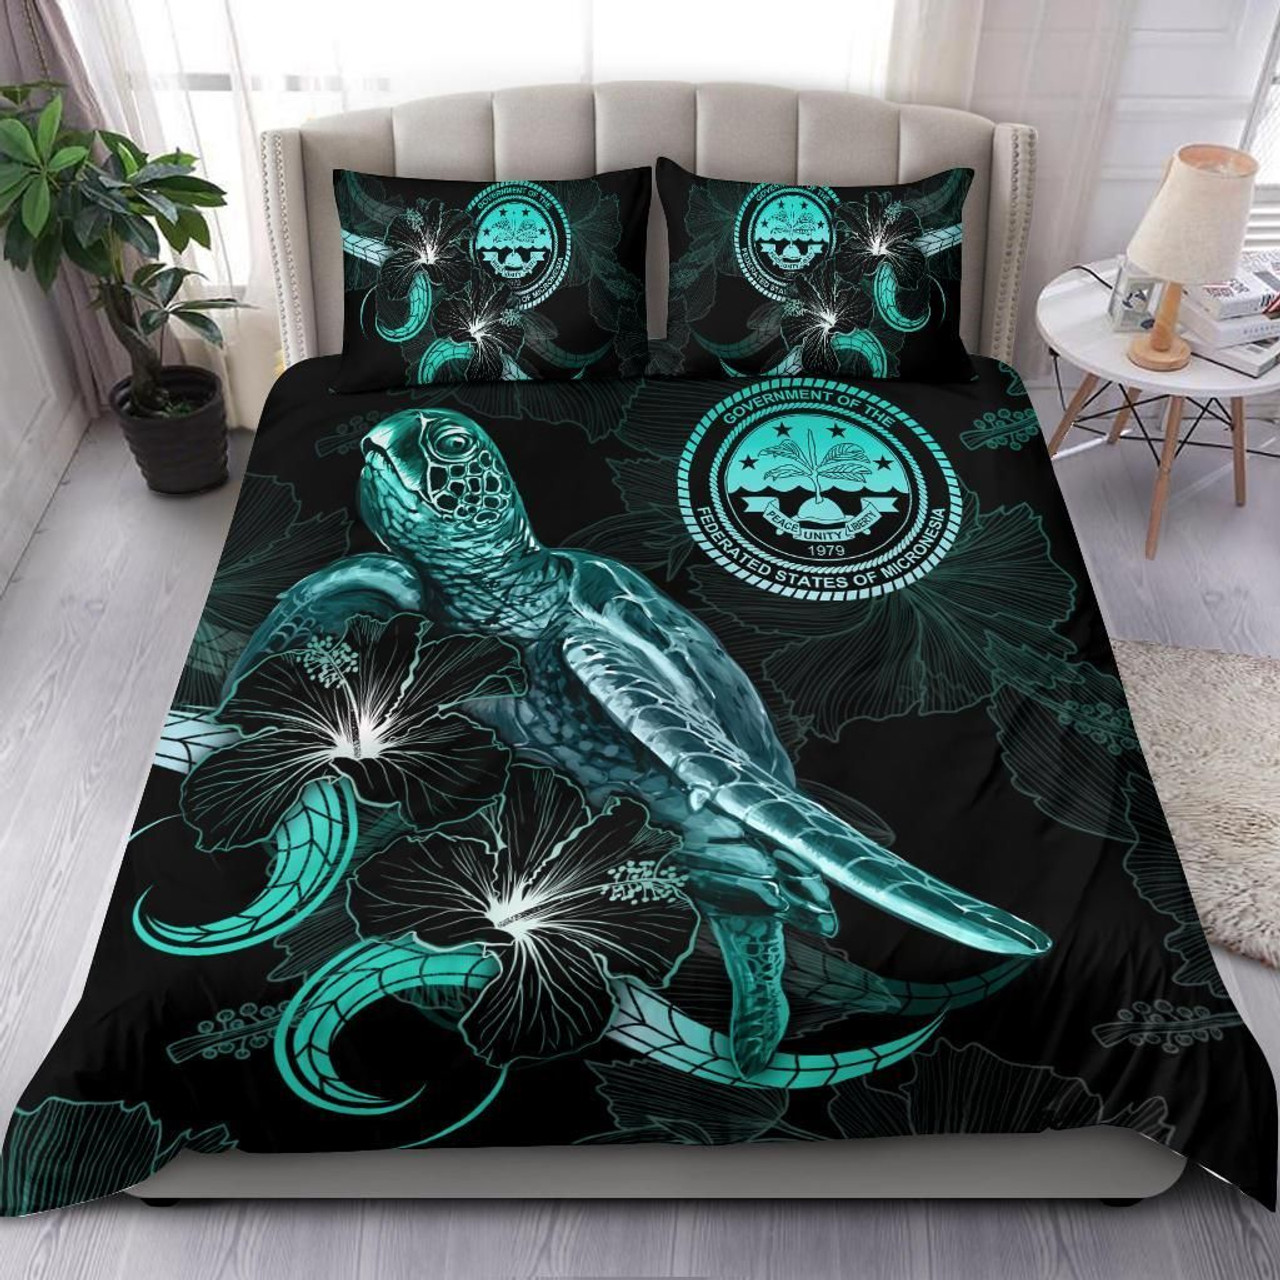 Federated States Of Micronesia Polynesian Bedding Set - Turtle With Blooming Hibiscus Turquoise 1